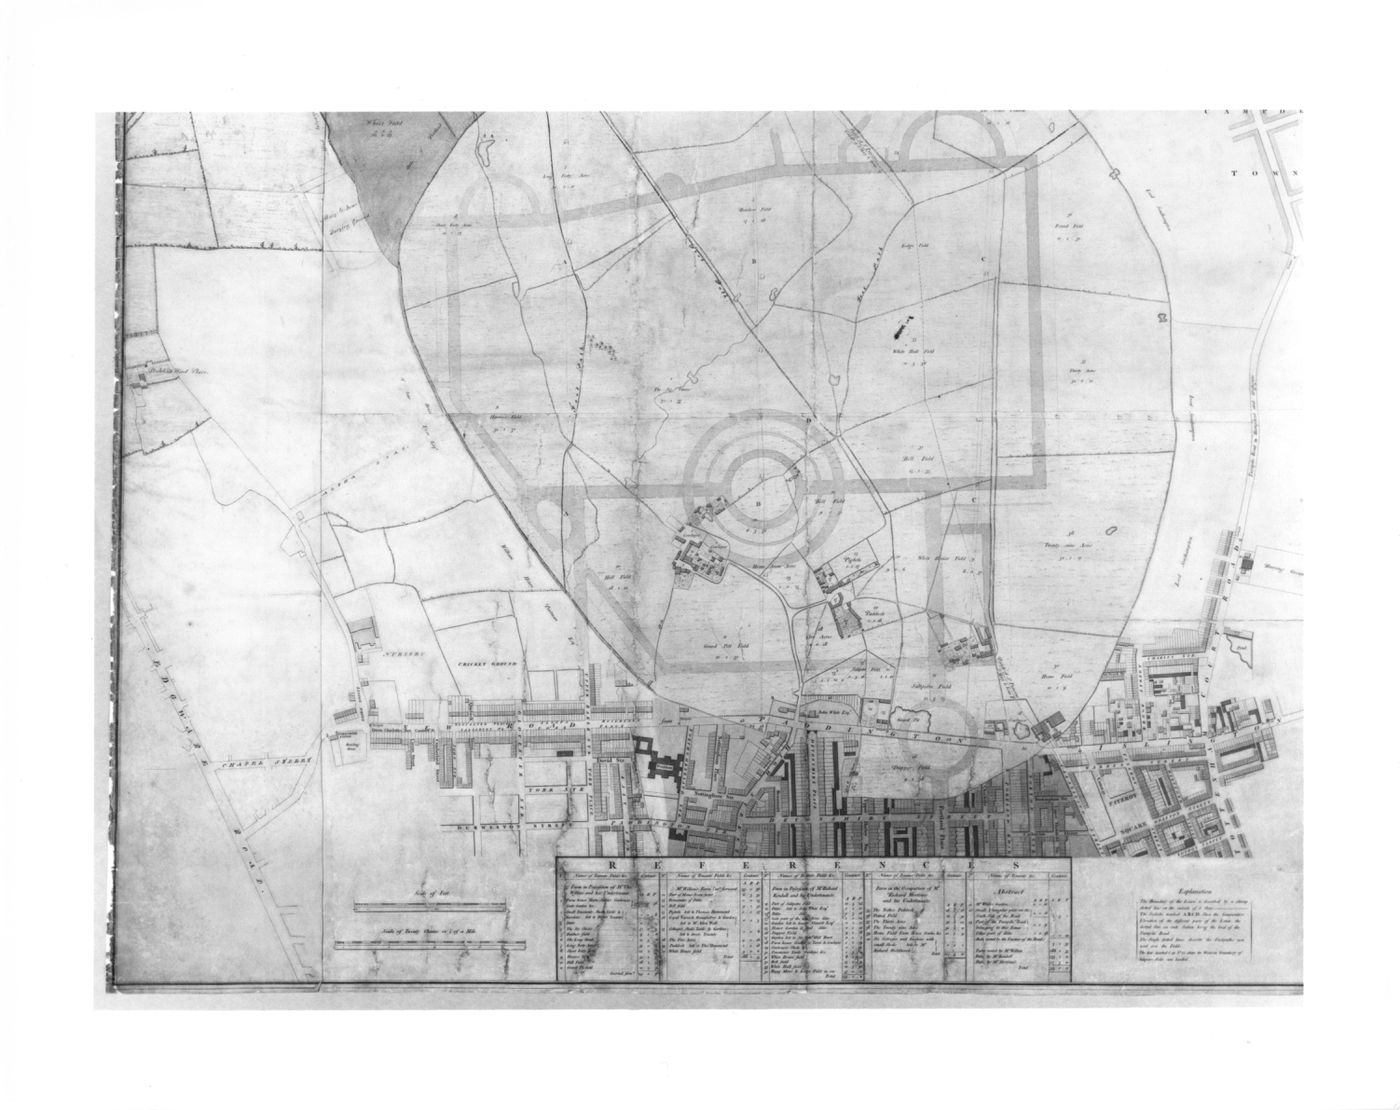 A preliminary design for Regent's Park drawn over a map of the existing site